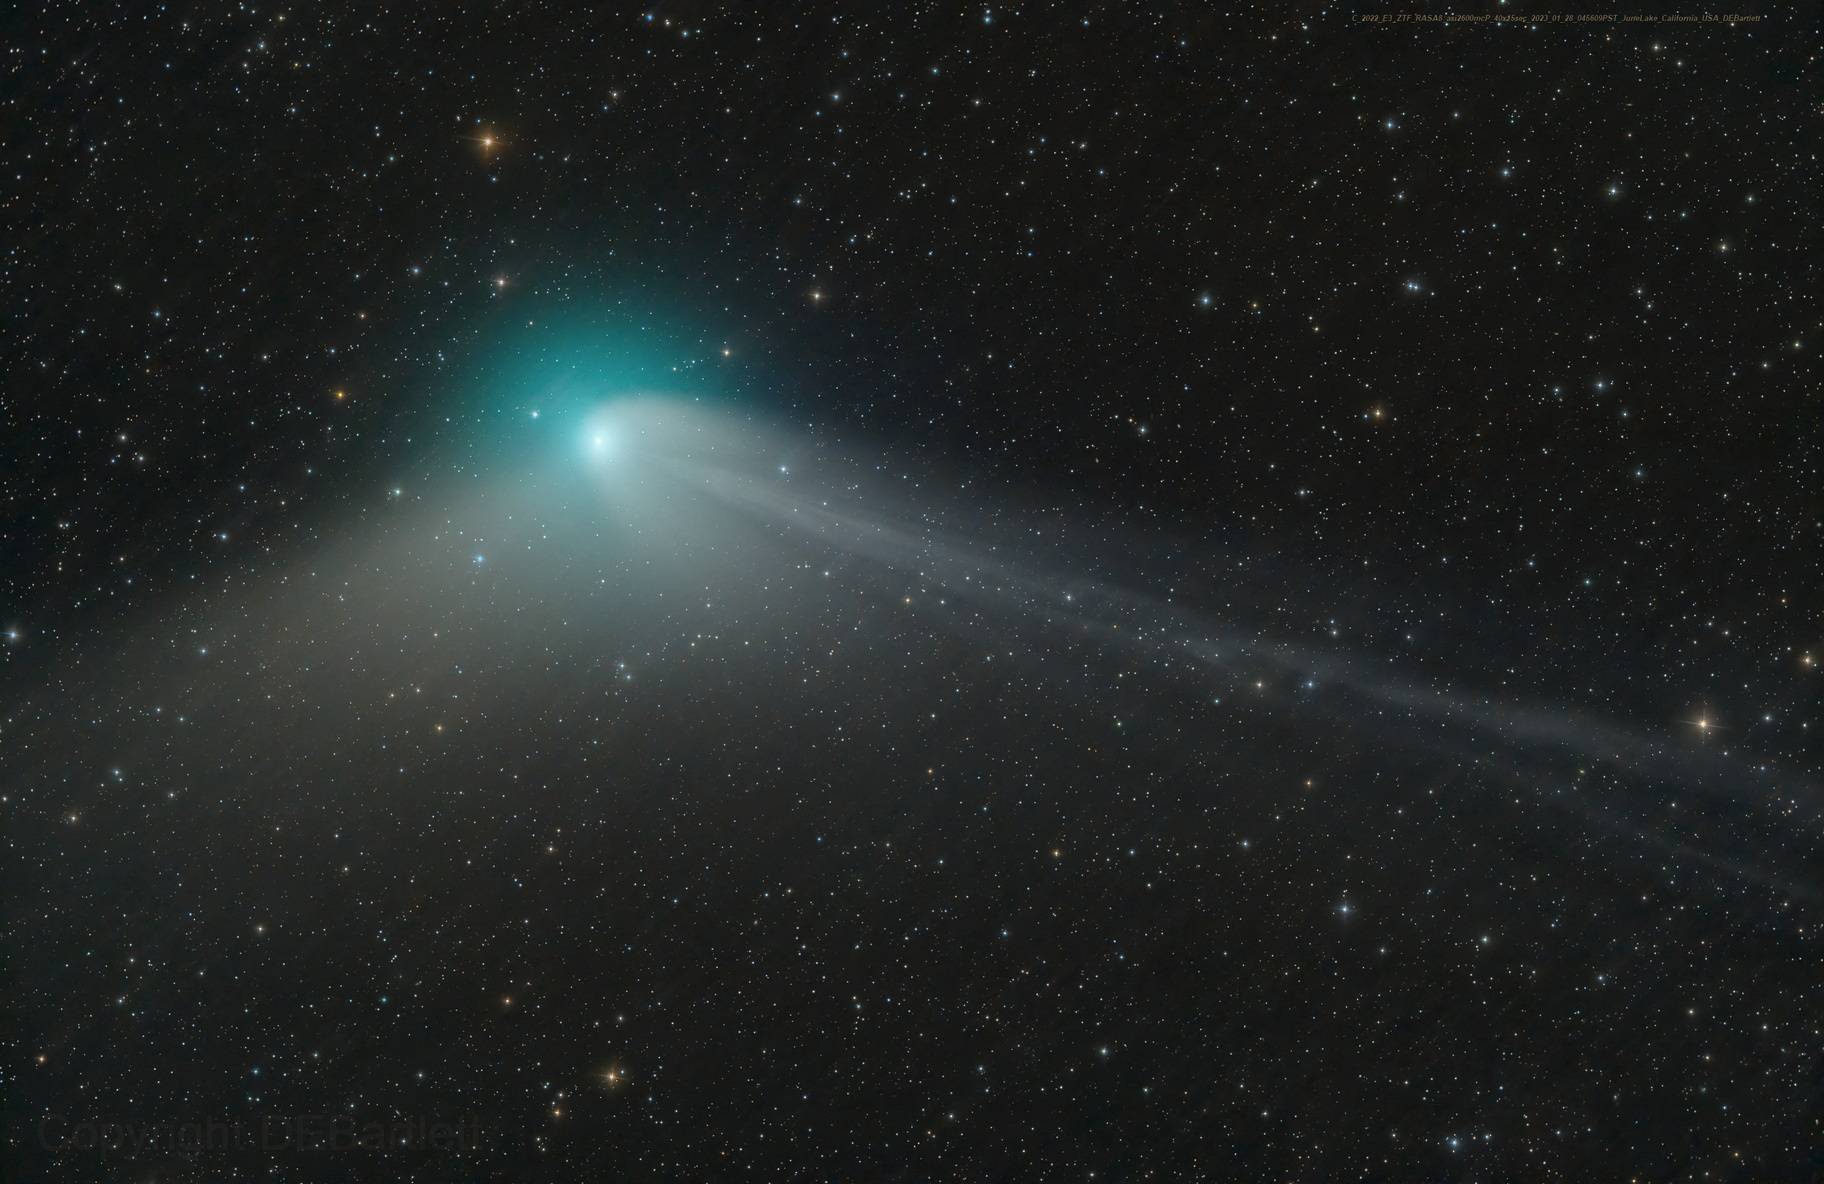 A green comet named Comet C/2022 E3 (ZTF), is seen journeying tens of millions of miles (km) away from Earth in this telescope image